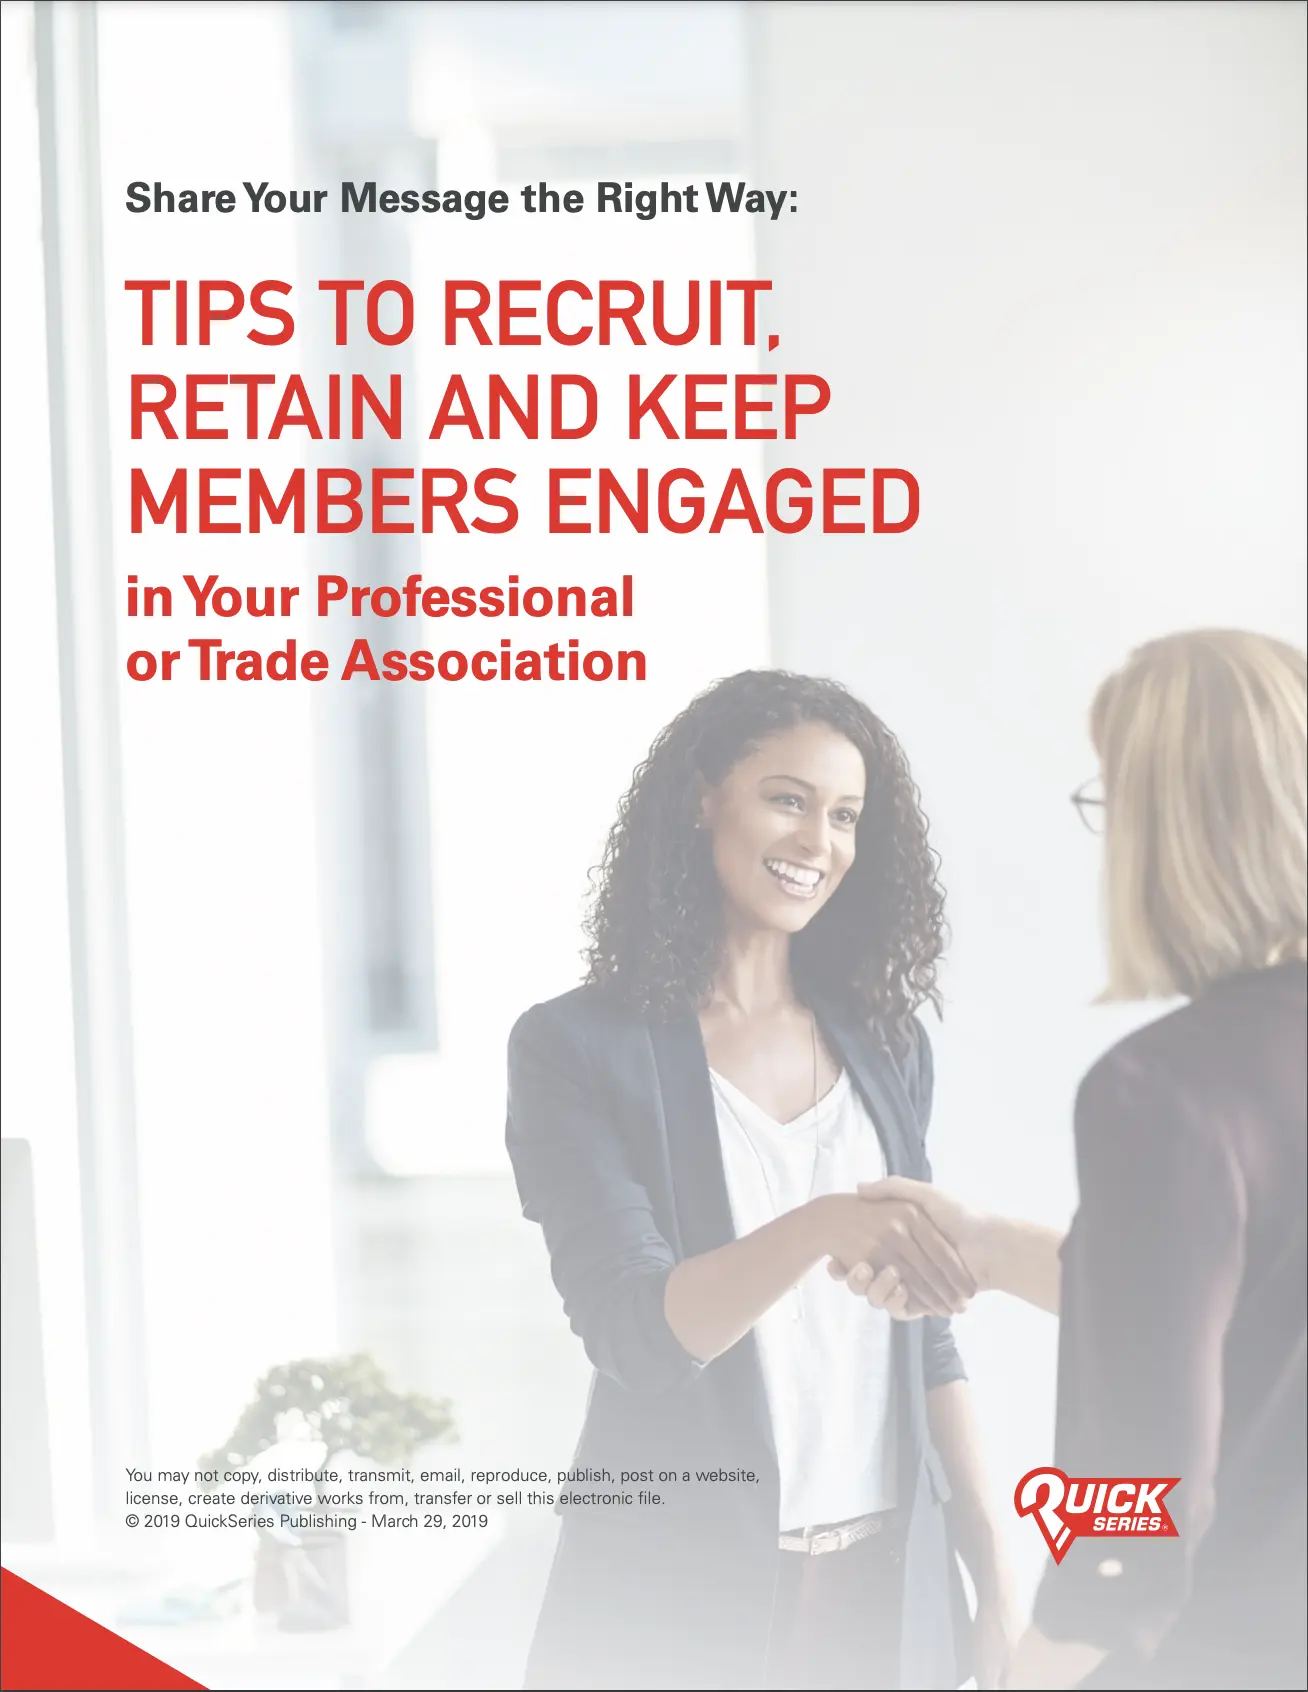 PDF cover image for Tips to Recruit, Retain and Keep Members Engaged white paper